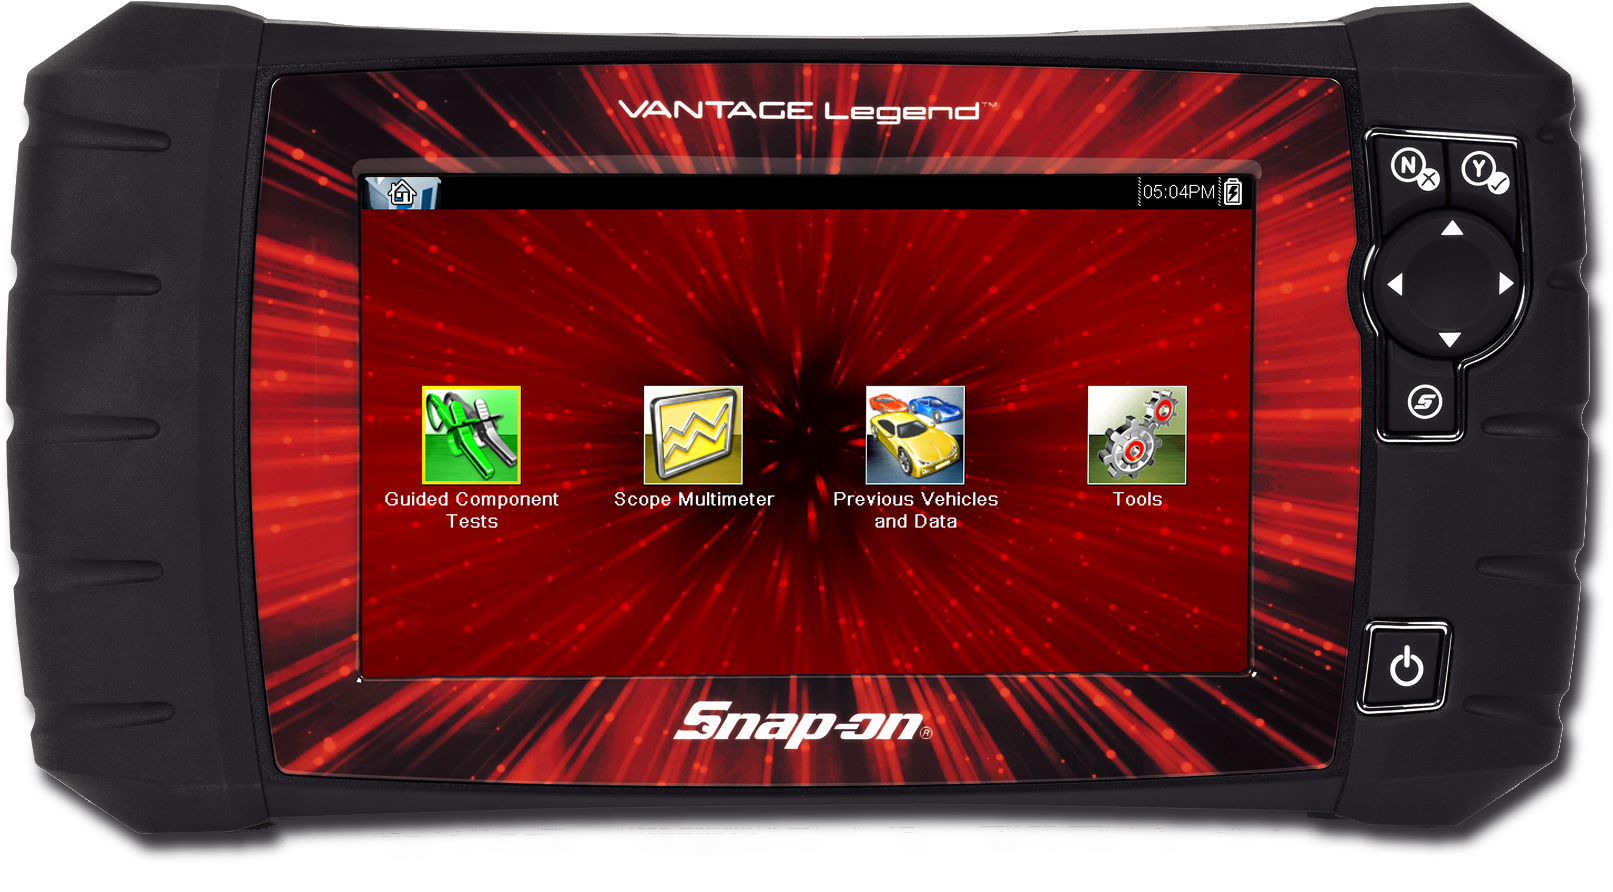 New VANTAGE Legend, the perfect companion to any Snap-on Scan Tool